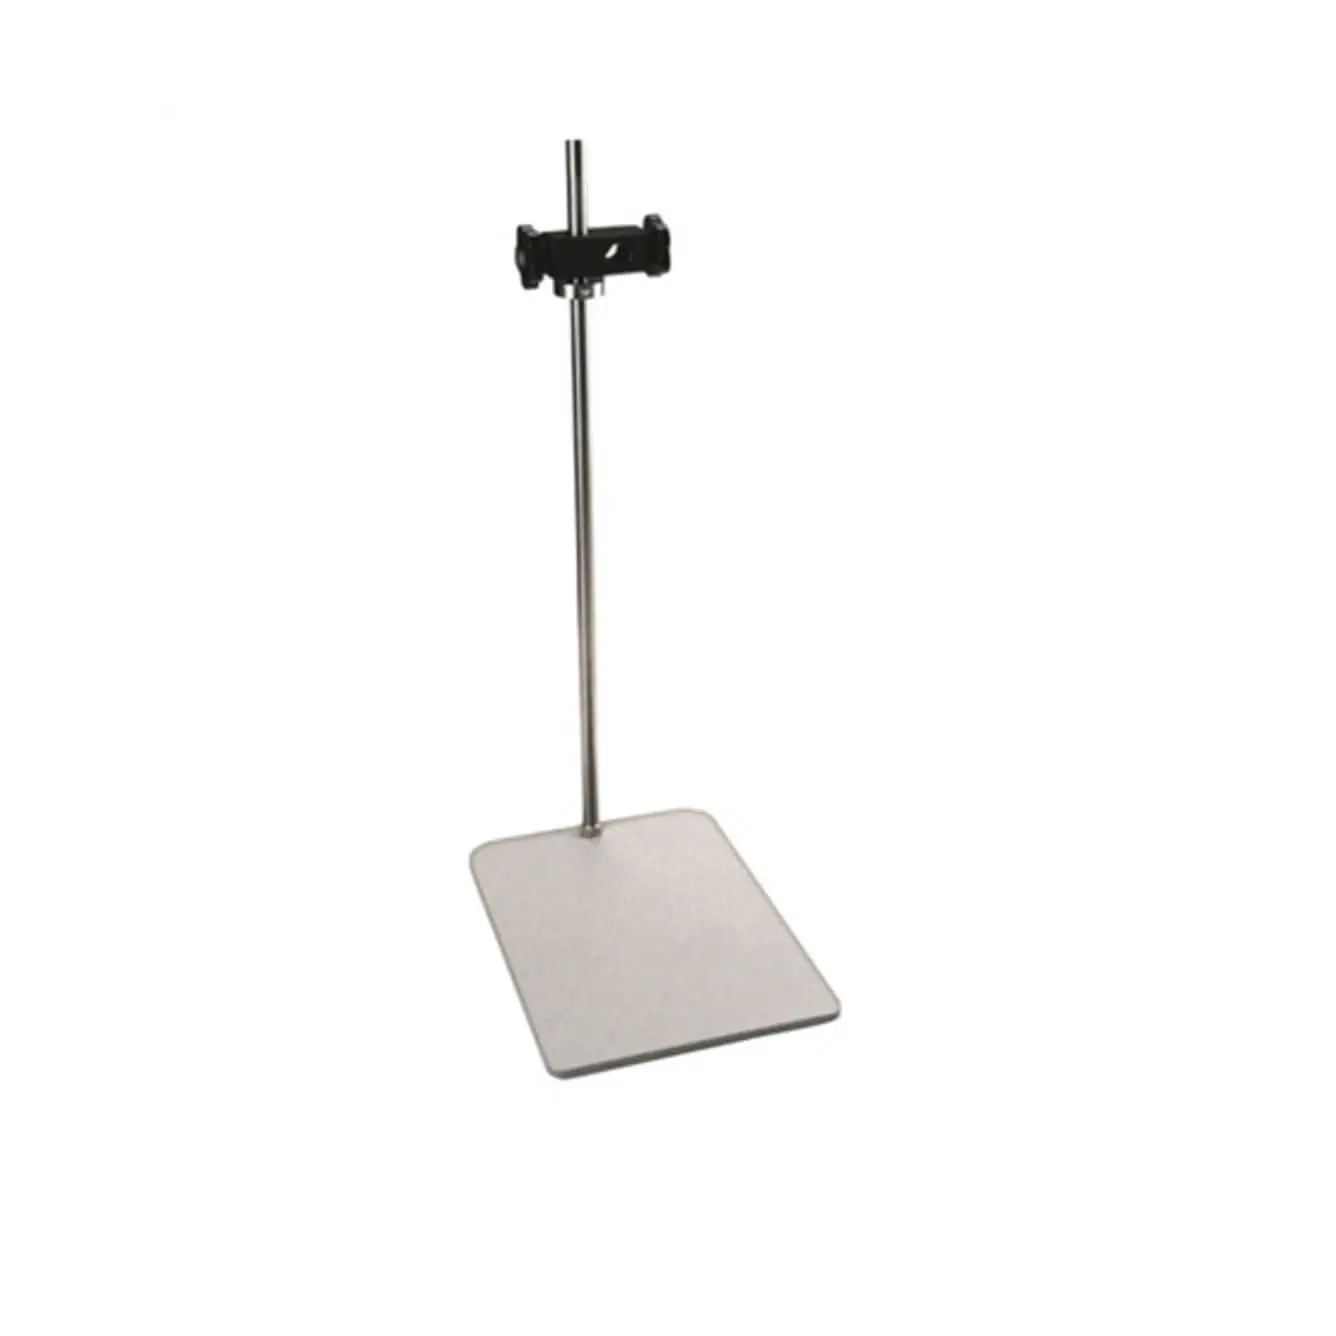 D-Lab Universal plate stand (W x D: 20 x 31cm), including support holder (H: 78 cm) and fixing device Grey